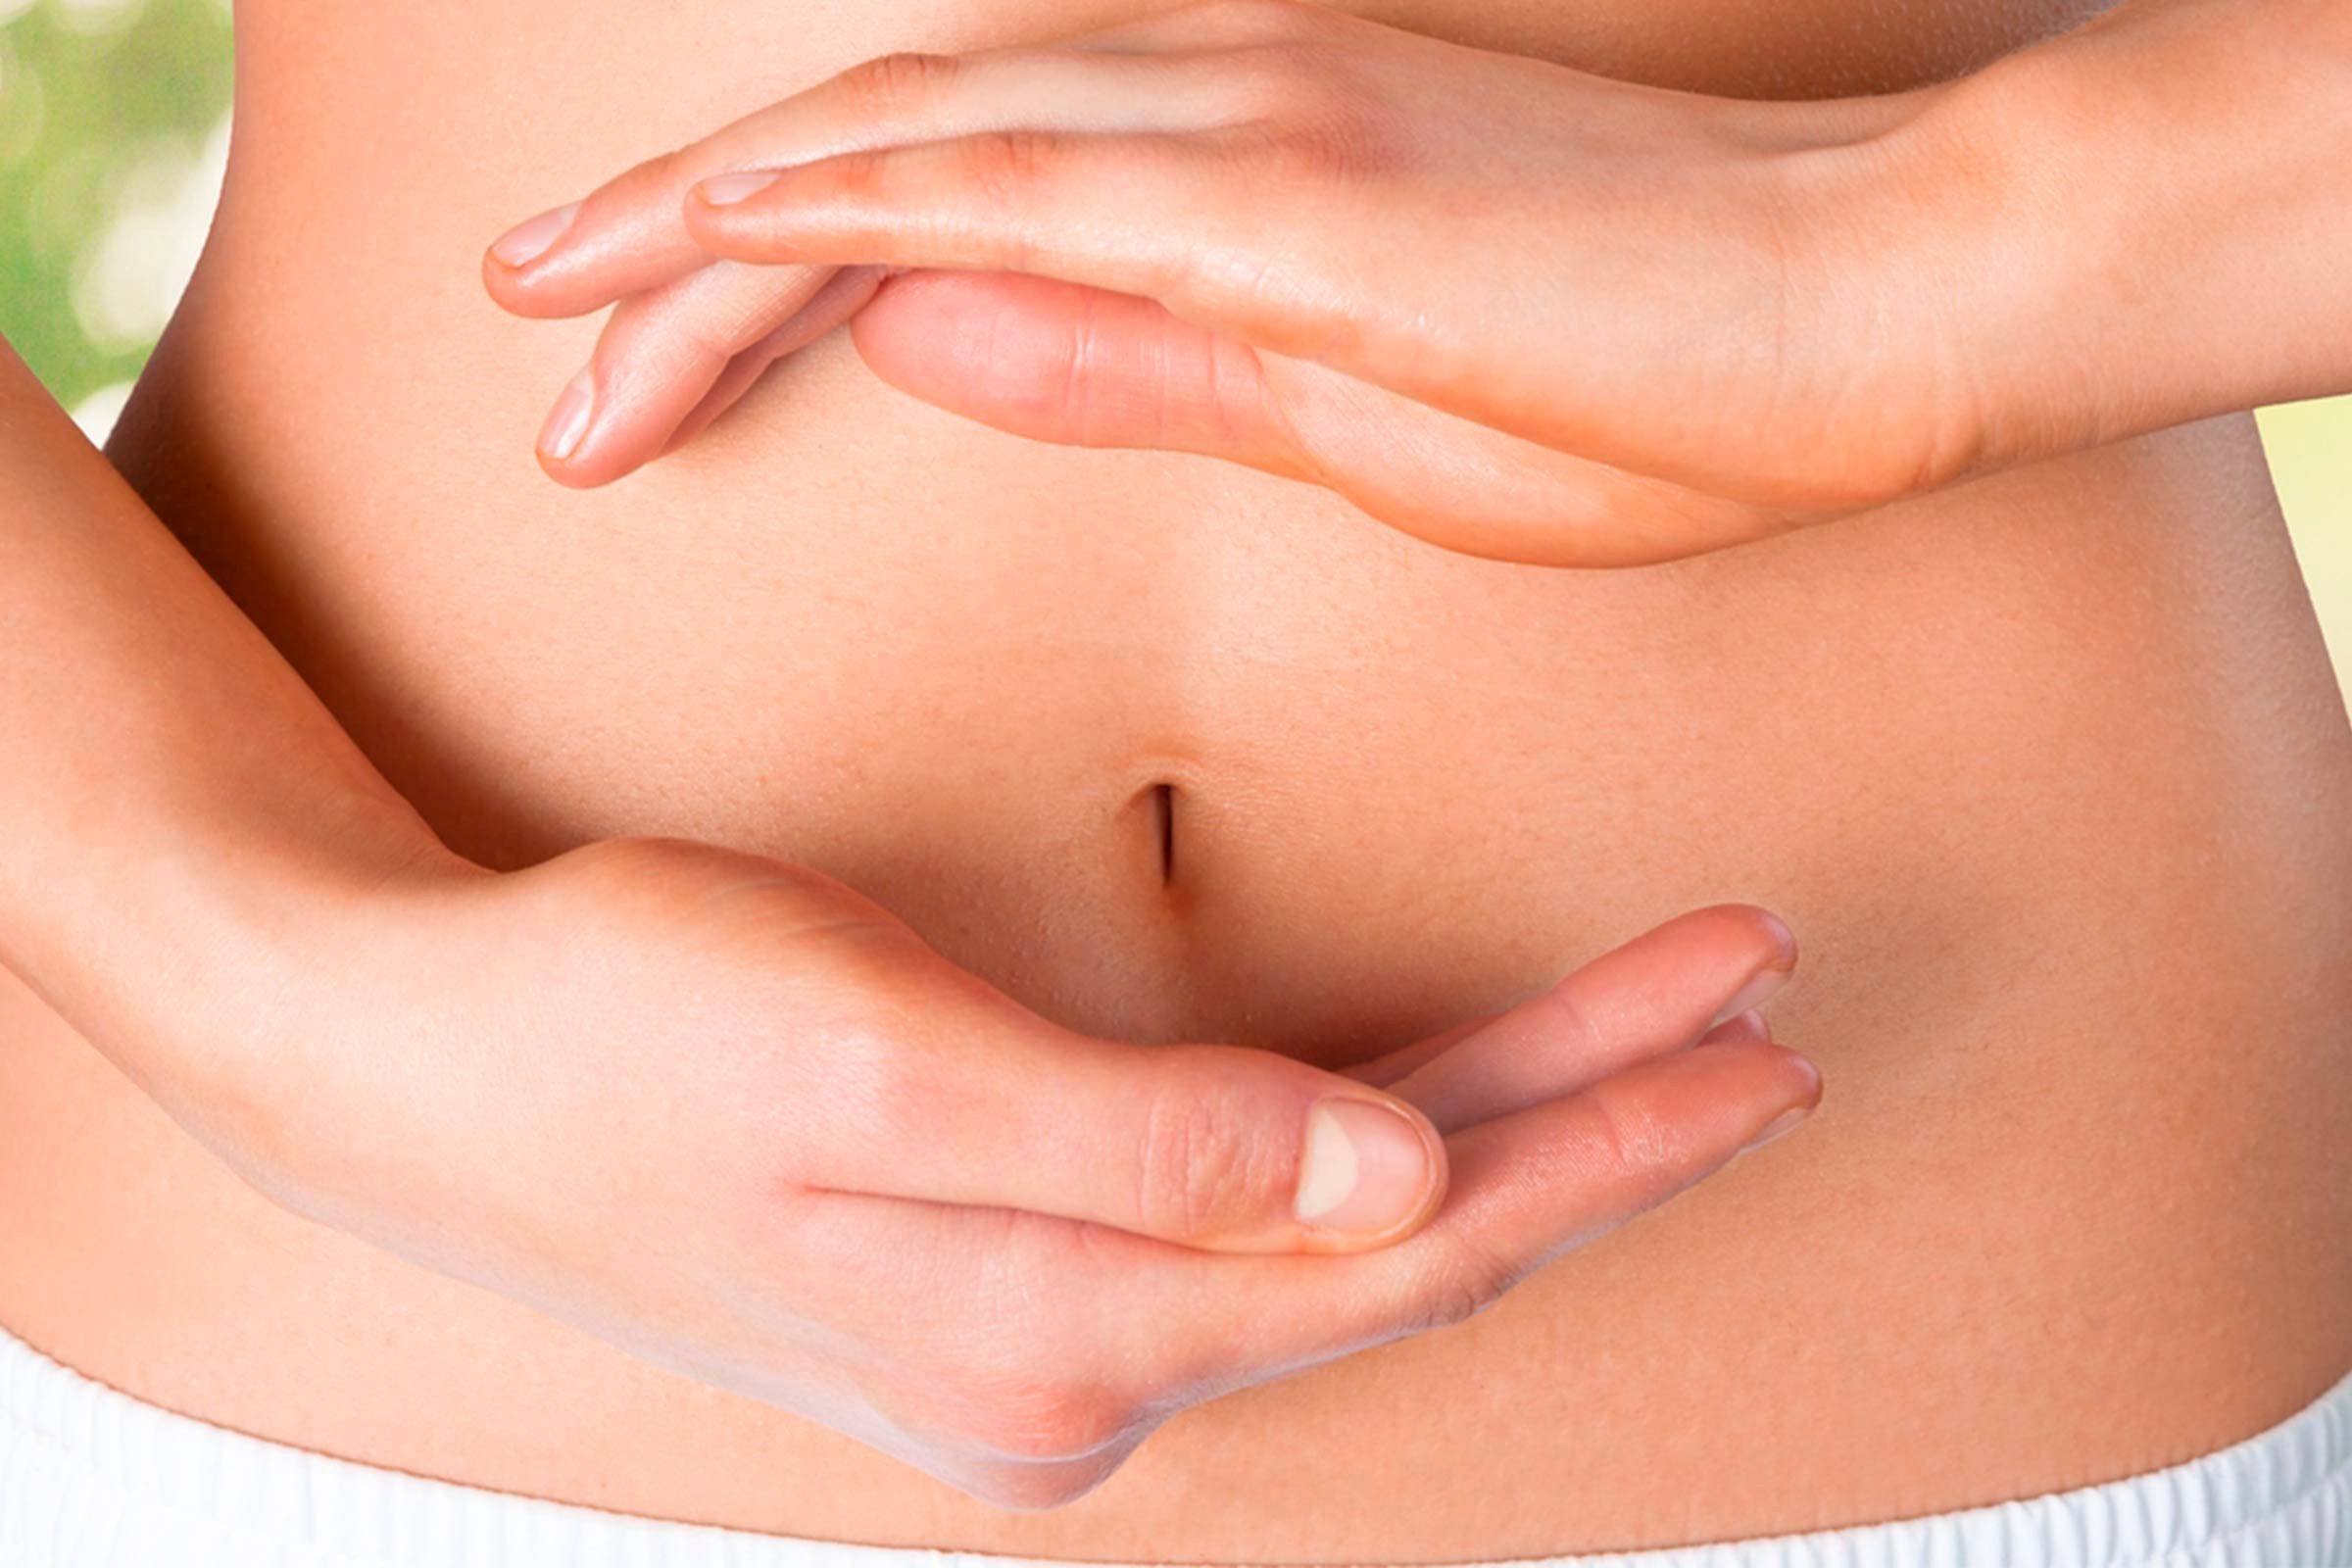 Reasons for your belly button popping out during the course of